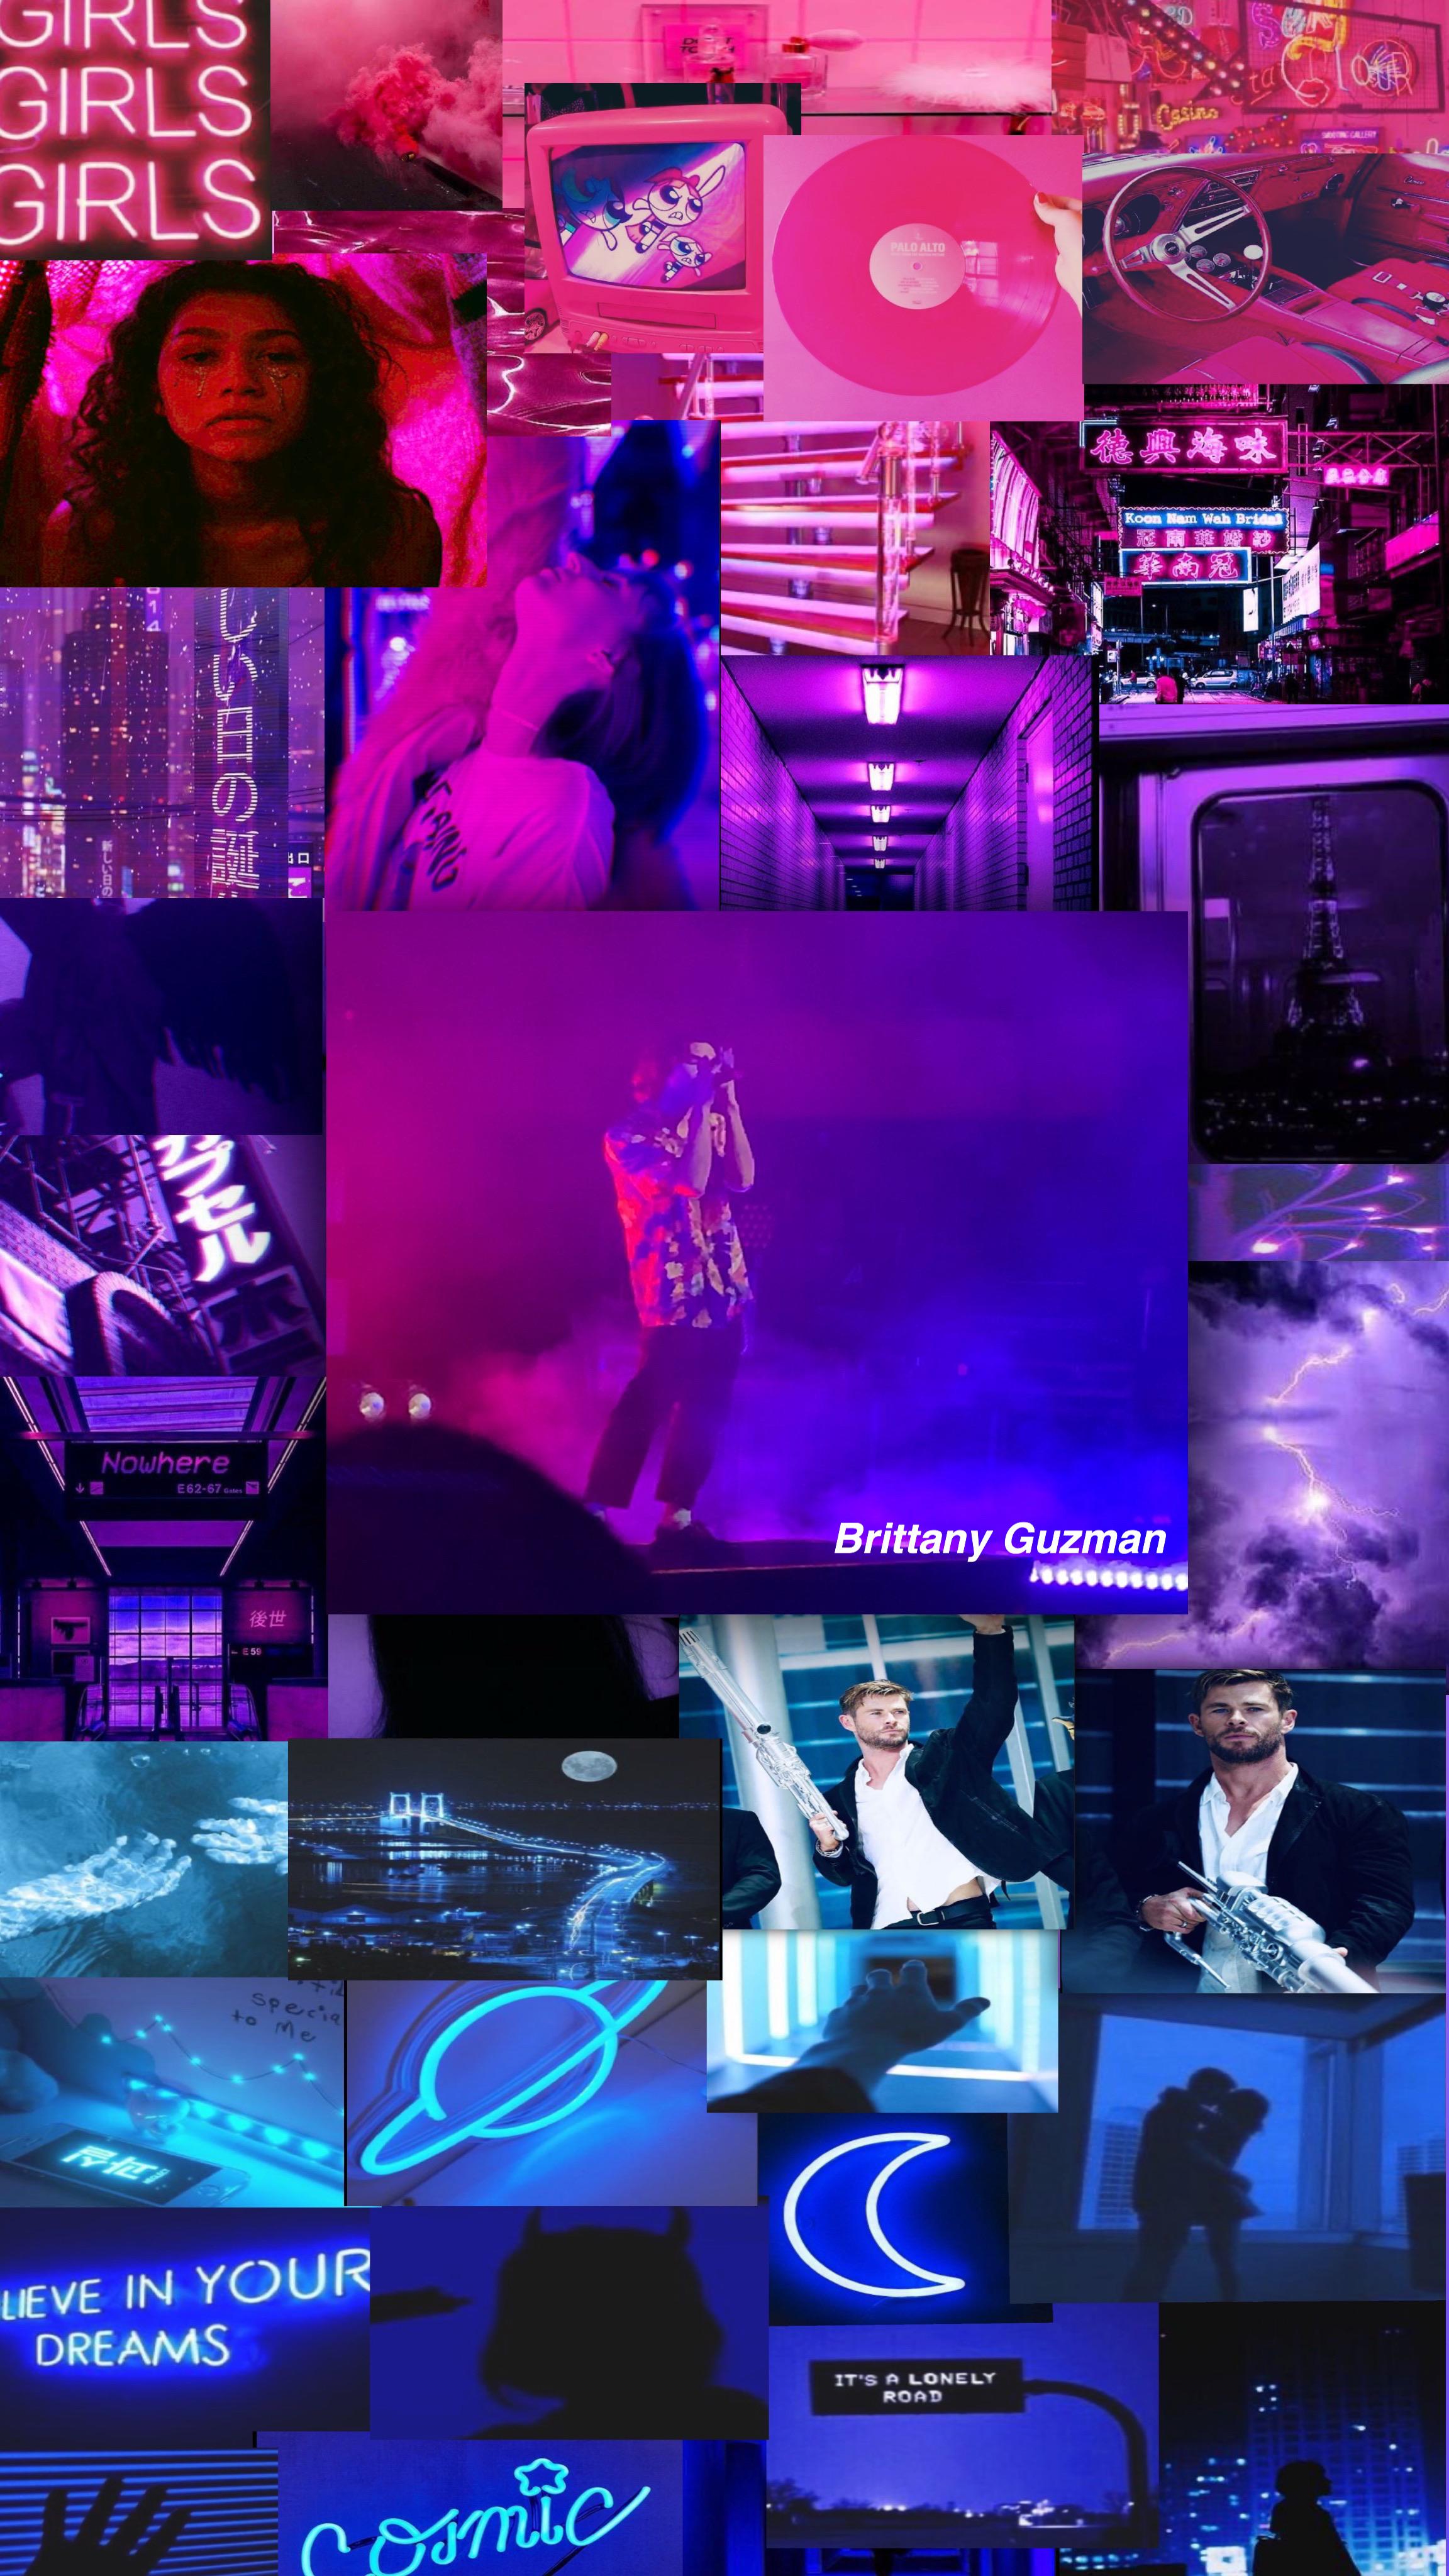 Aesthetic background of purple and blue neon lights with various pictures of Britney, the moon, and the word 